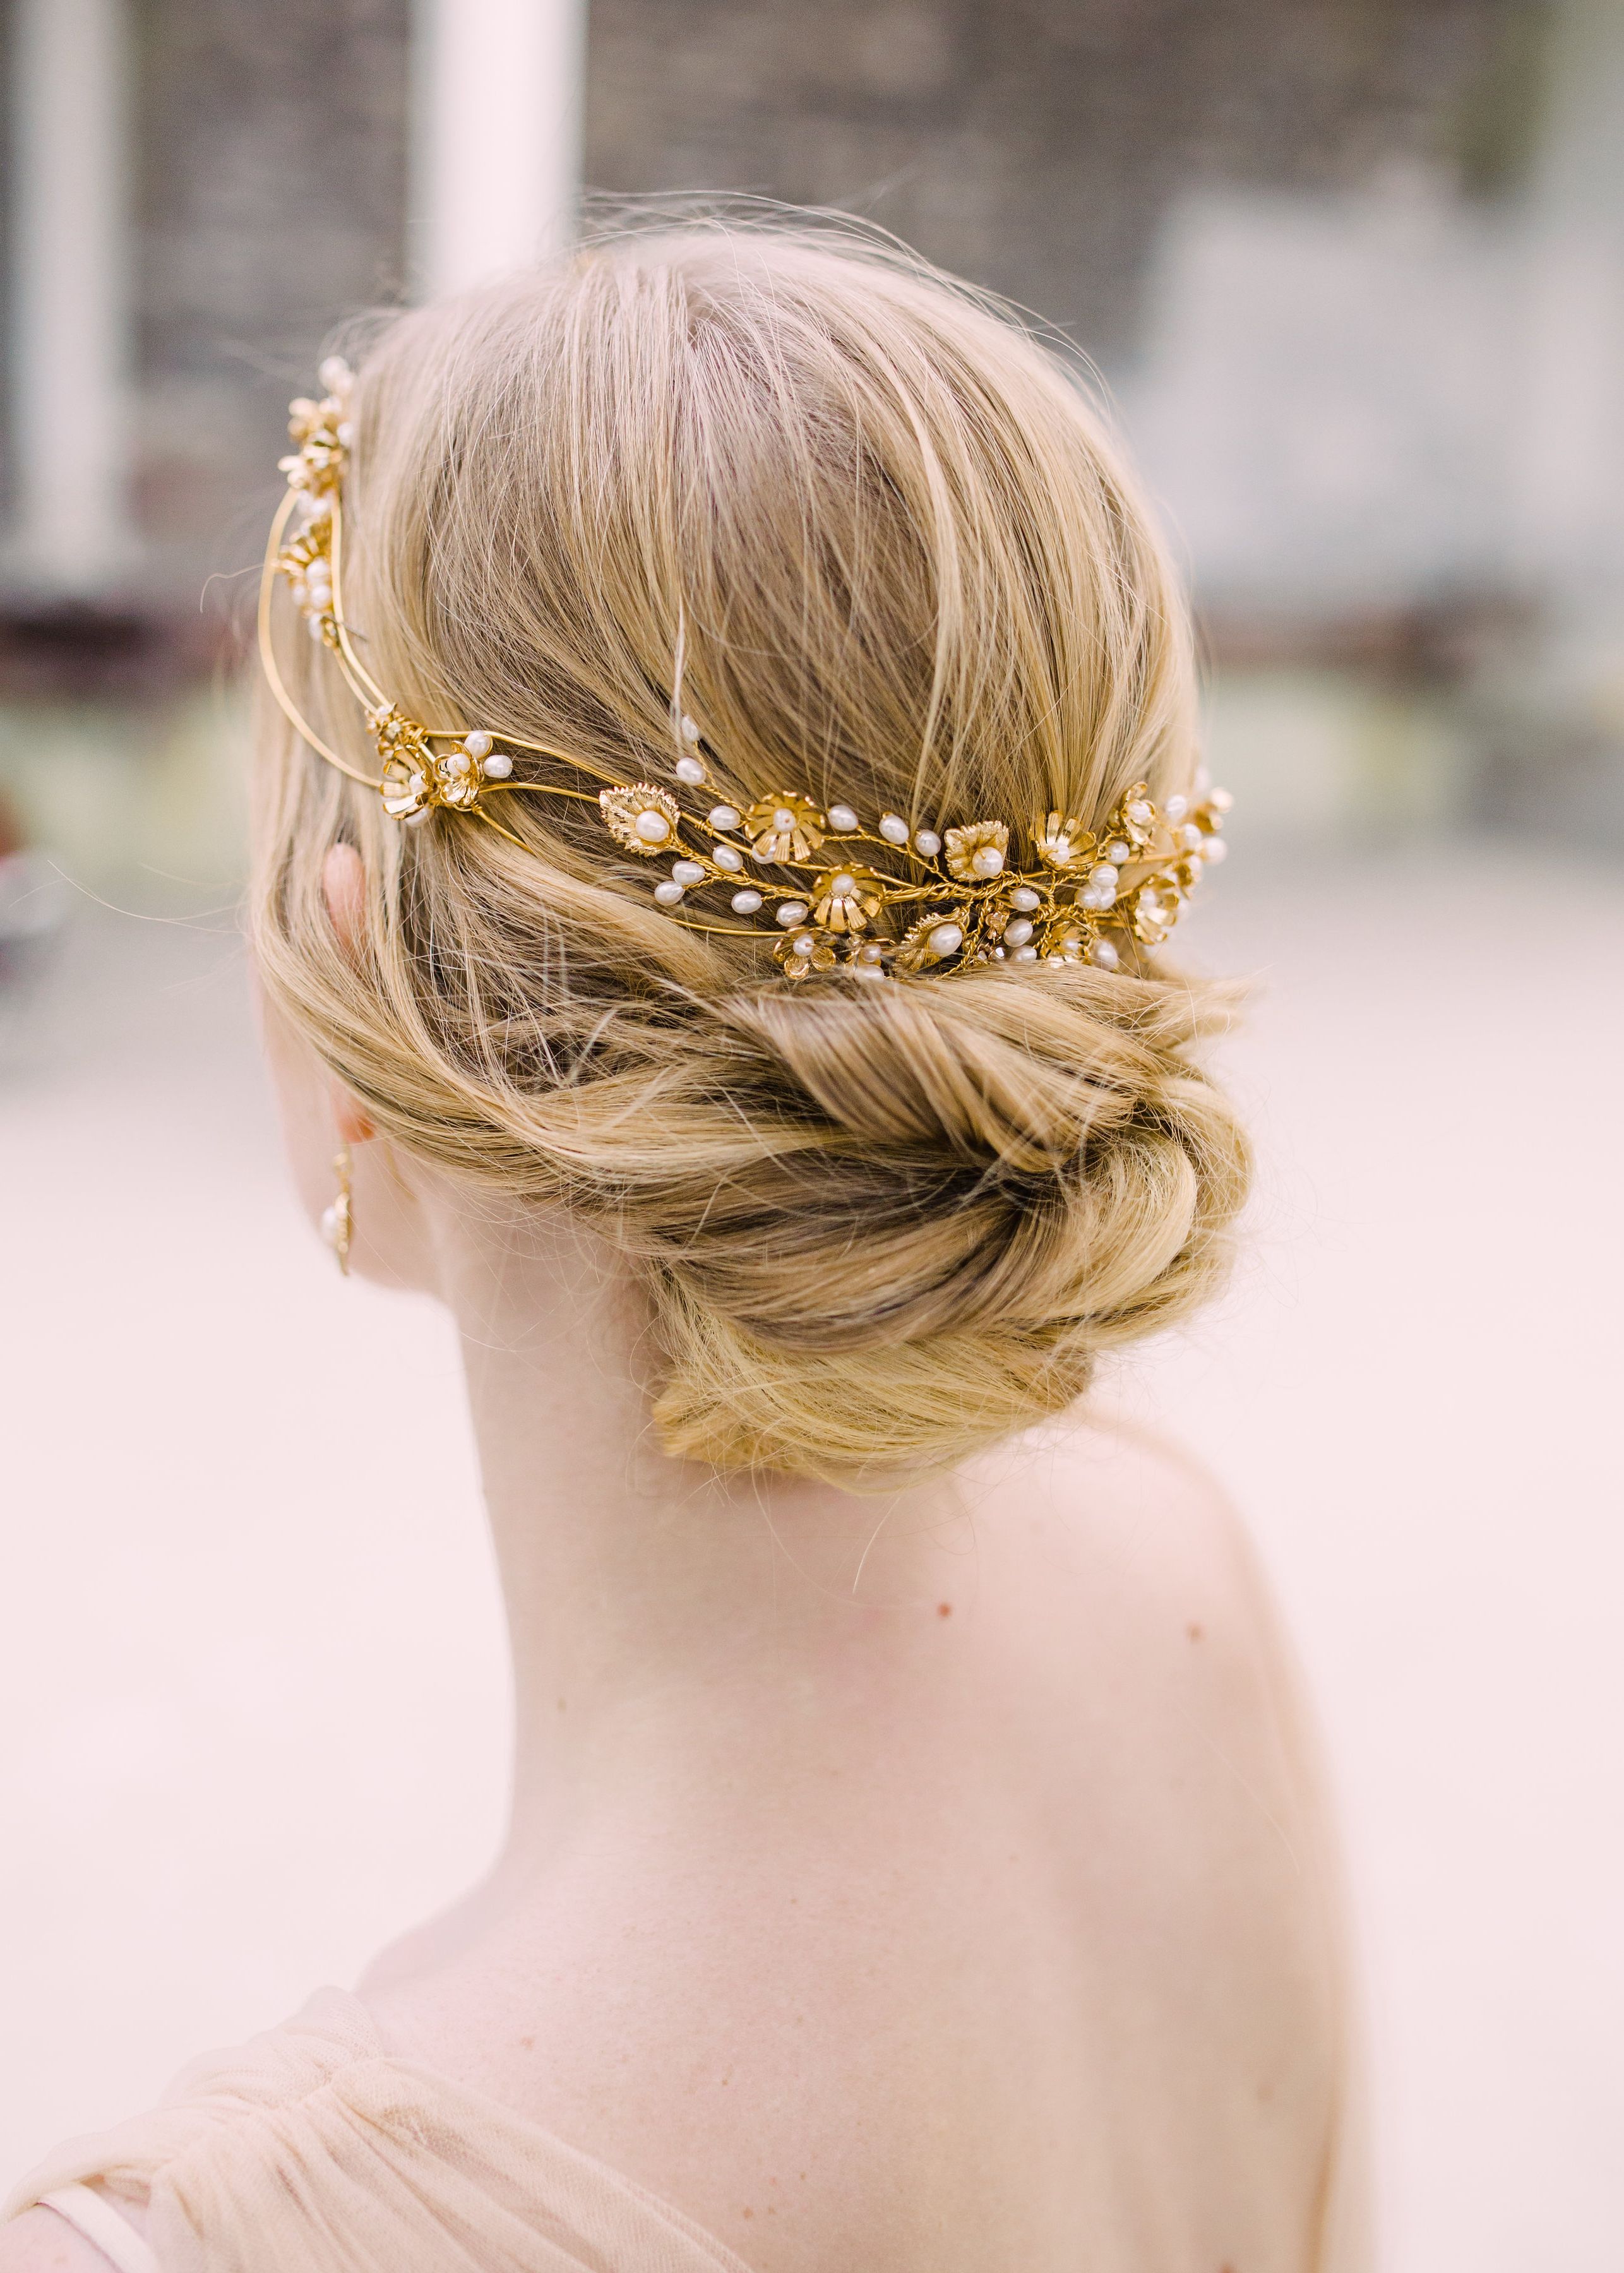 Most Recently Released Vintage Asymmetrical Wedding Hairstyles Within Bridal Hair Accessories: Accessorise Your Wedding Hairstyle – Hair (View 18 of 20)